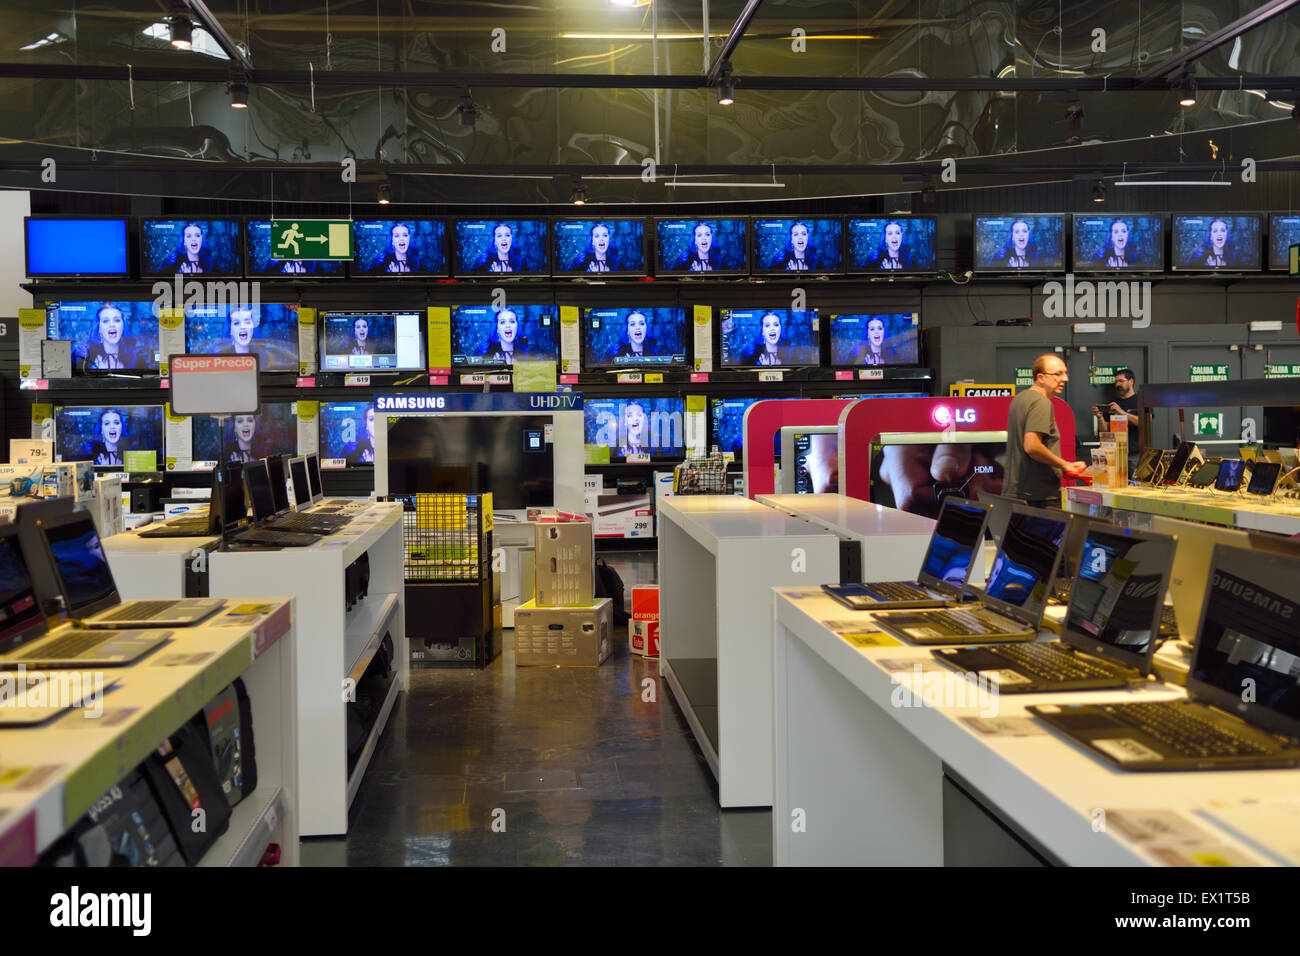 Display of televisions and laptop computers in Carrefour hypermarket. Madrid, Plaza Norte 2 shopping centre, Spain Stock Photo